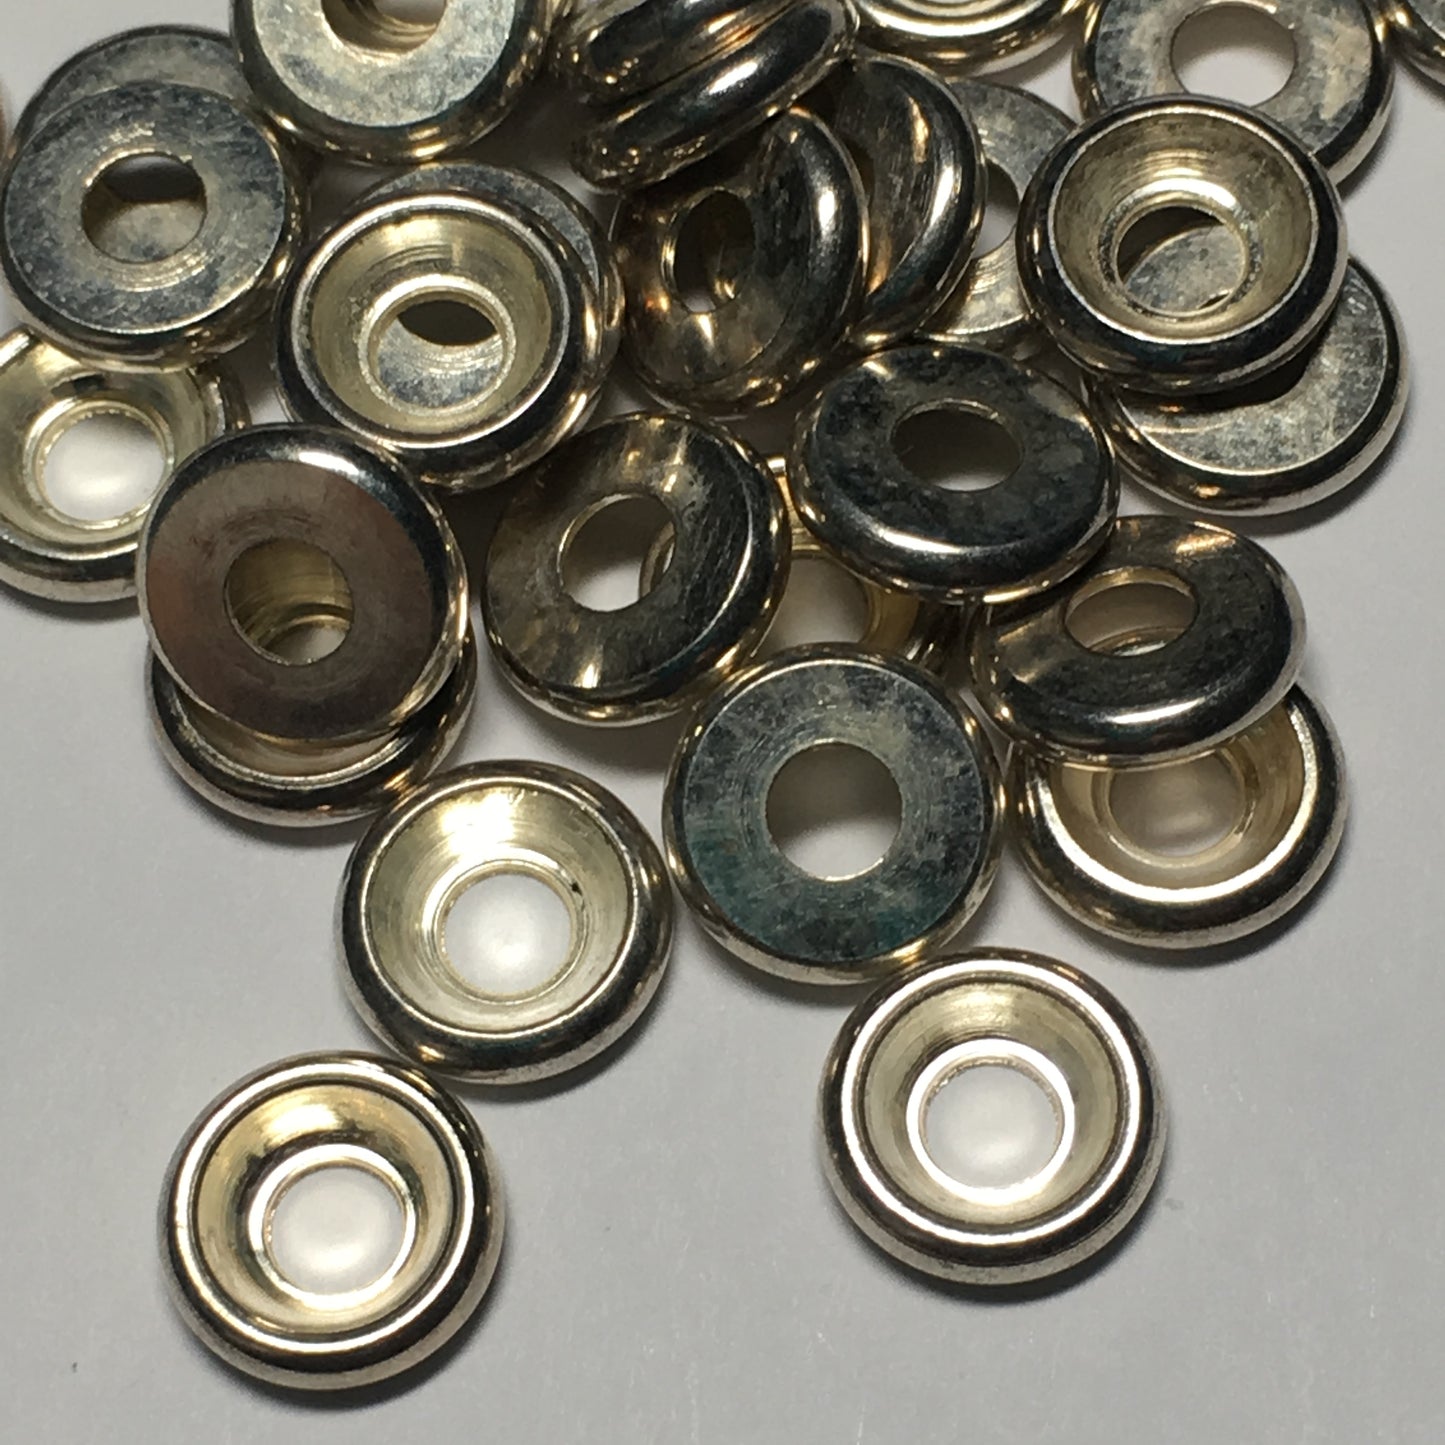 Bright Silver Flat Bead Cap Spacer, 9 x 2.25 mm, 3 mm Hole - 10 or 14 Spacers